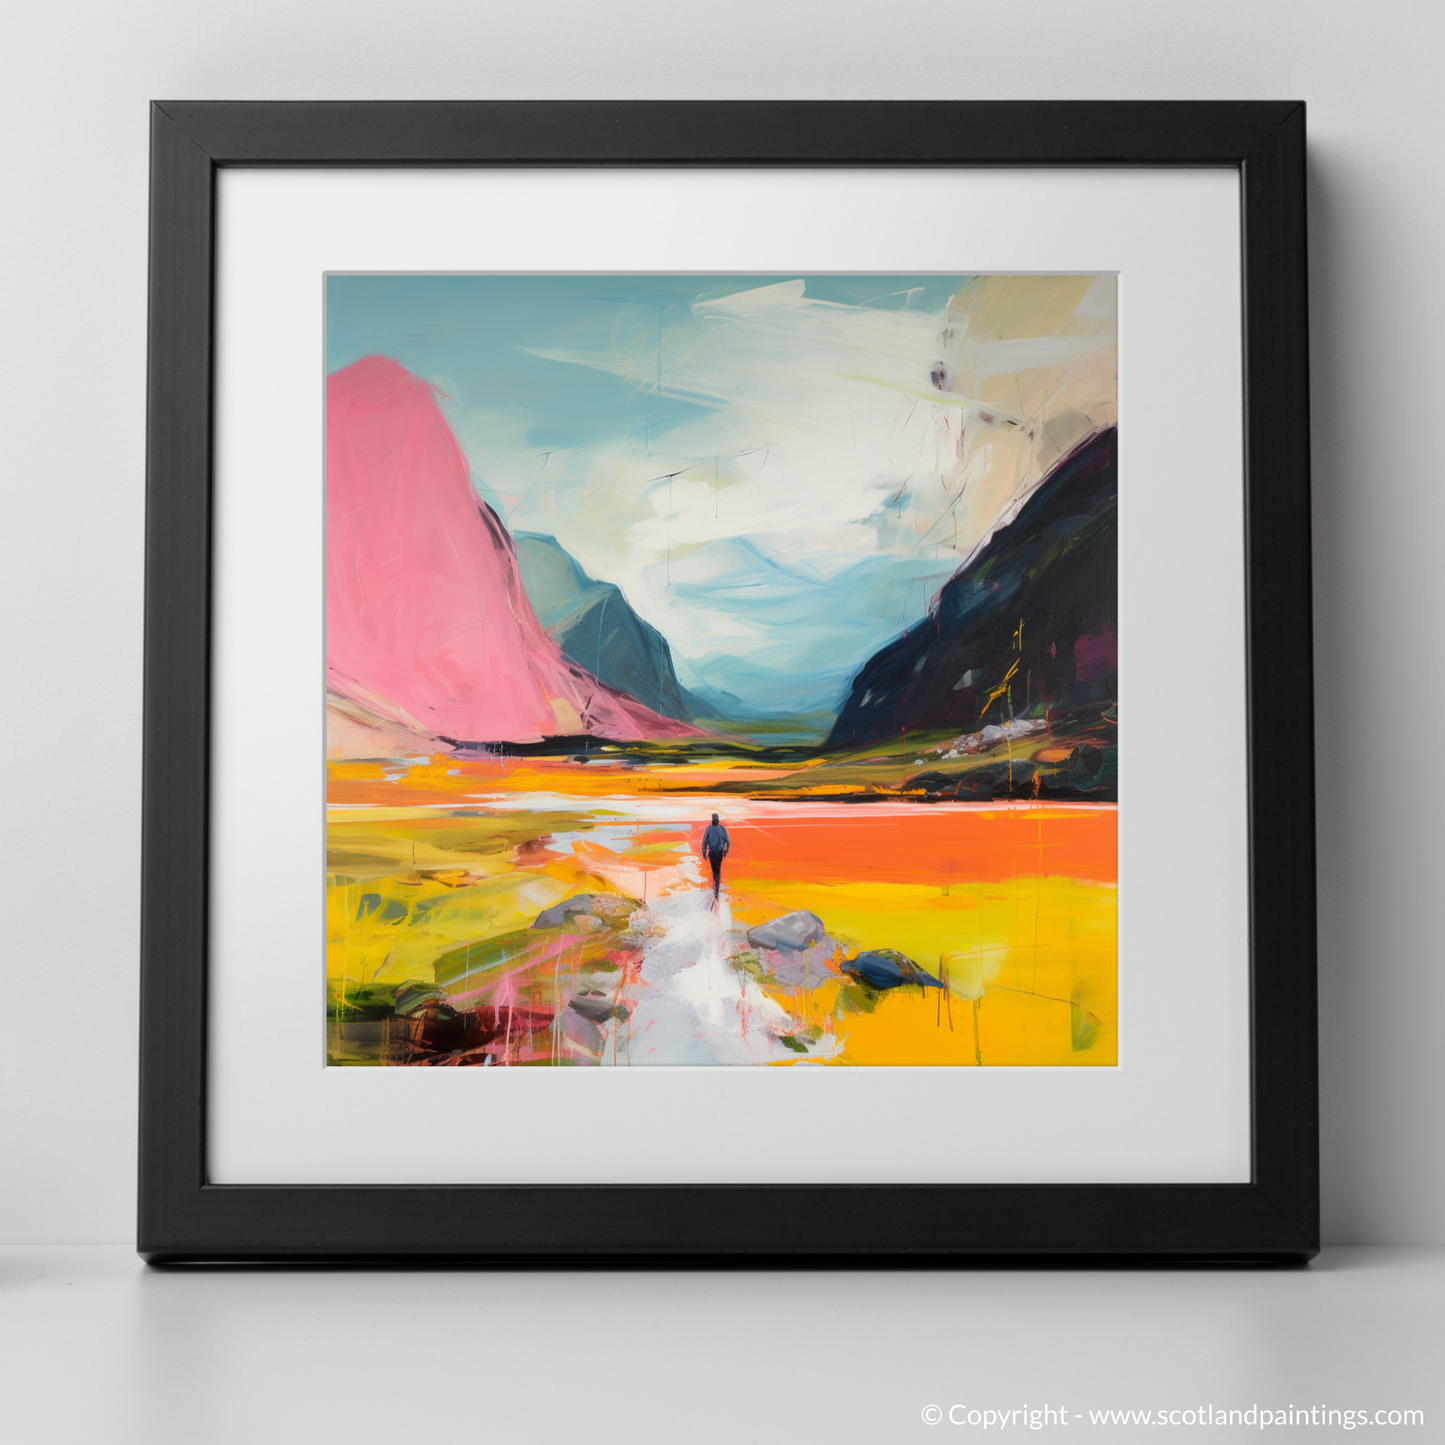 Art Print of Lone hiker in Glencoe during summer with a black frame